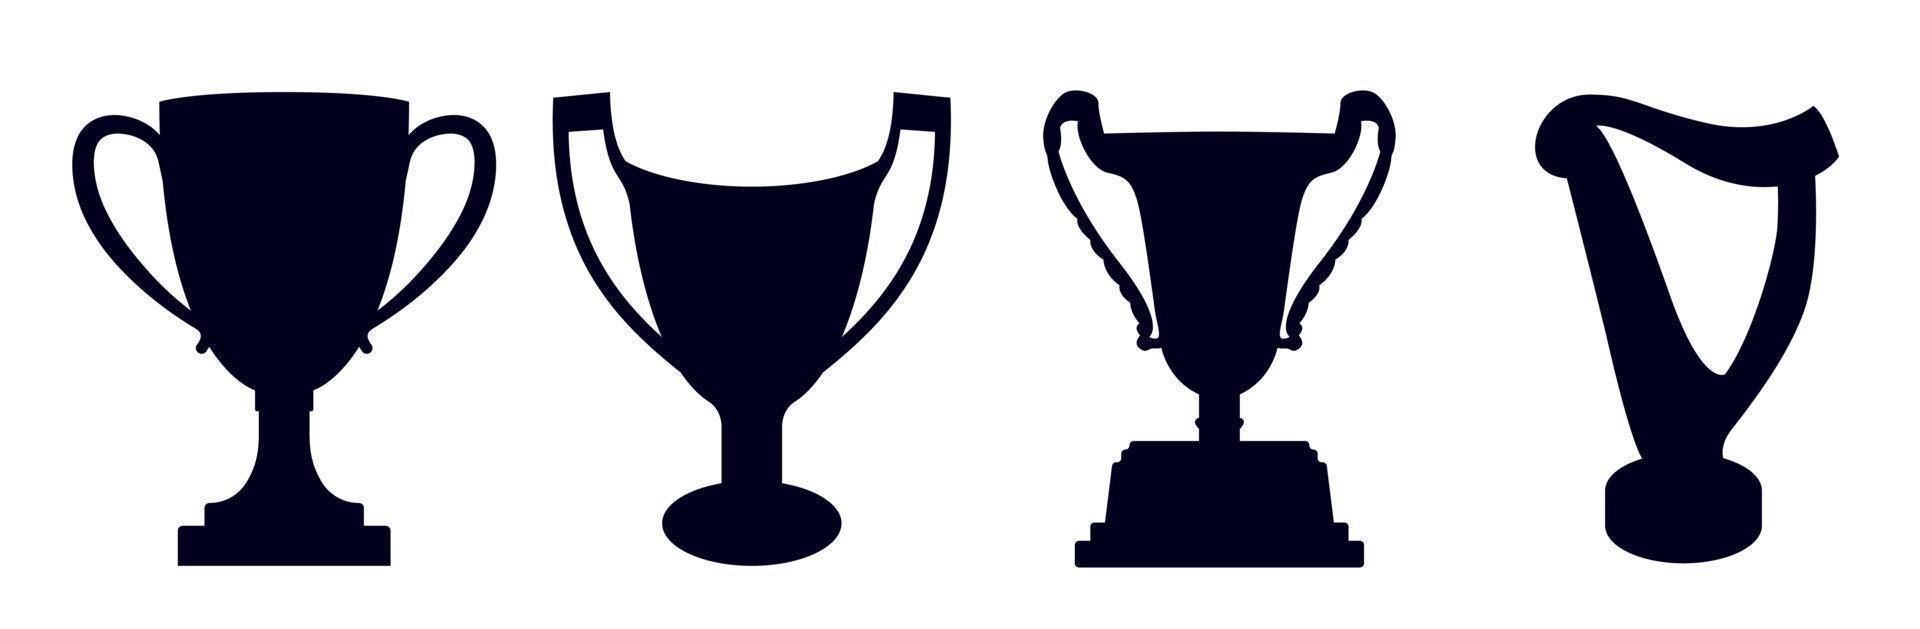 Trophy cup icon collection vector